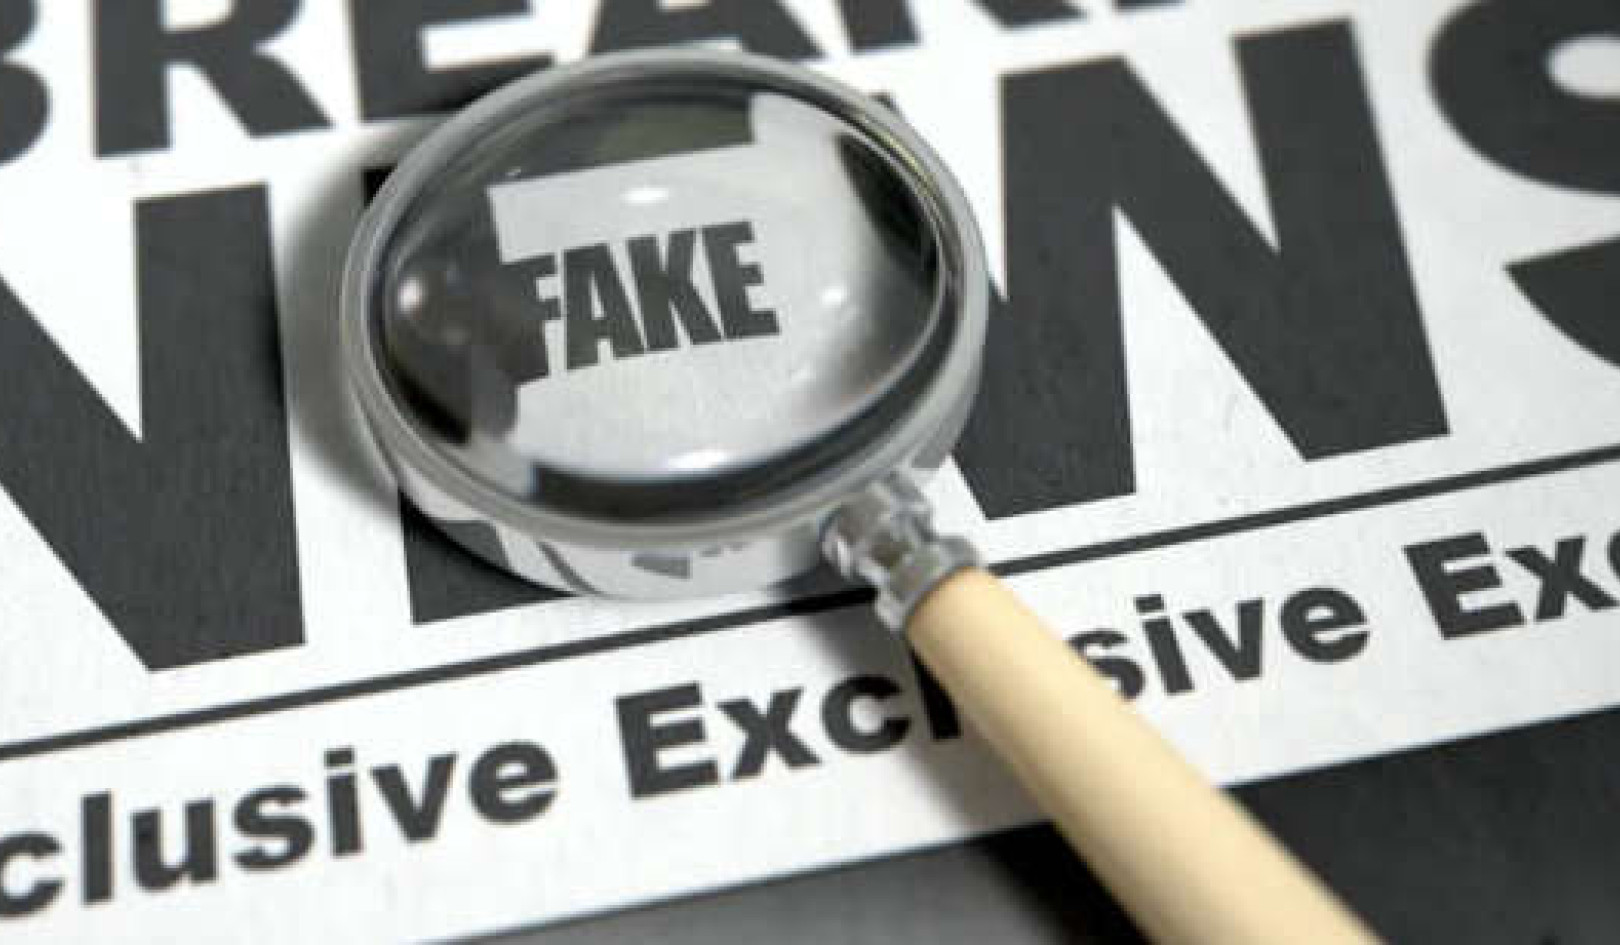 People With Greater Emotional Intelligence Are Better At Spotting Fake News